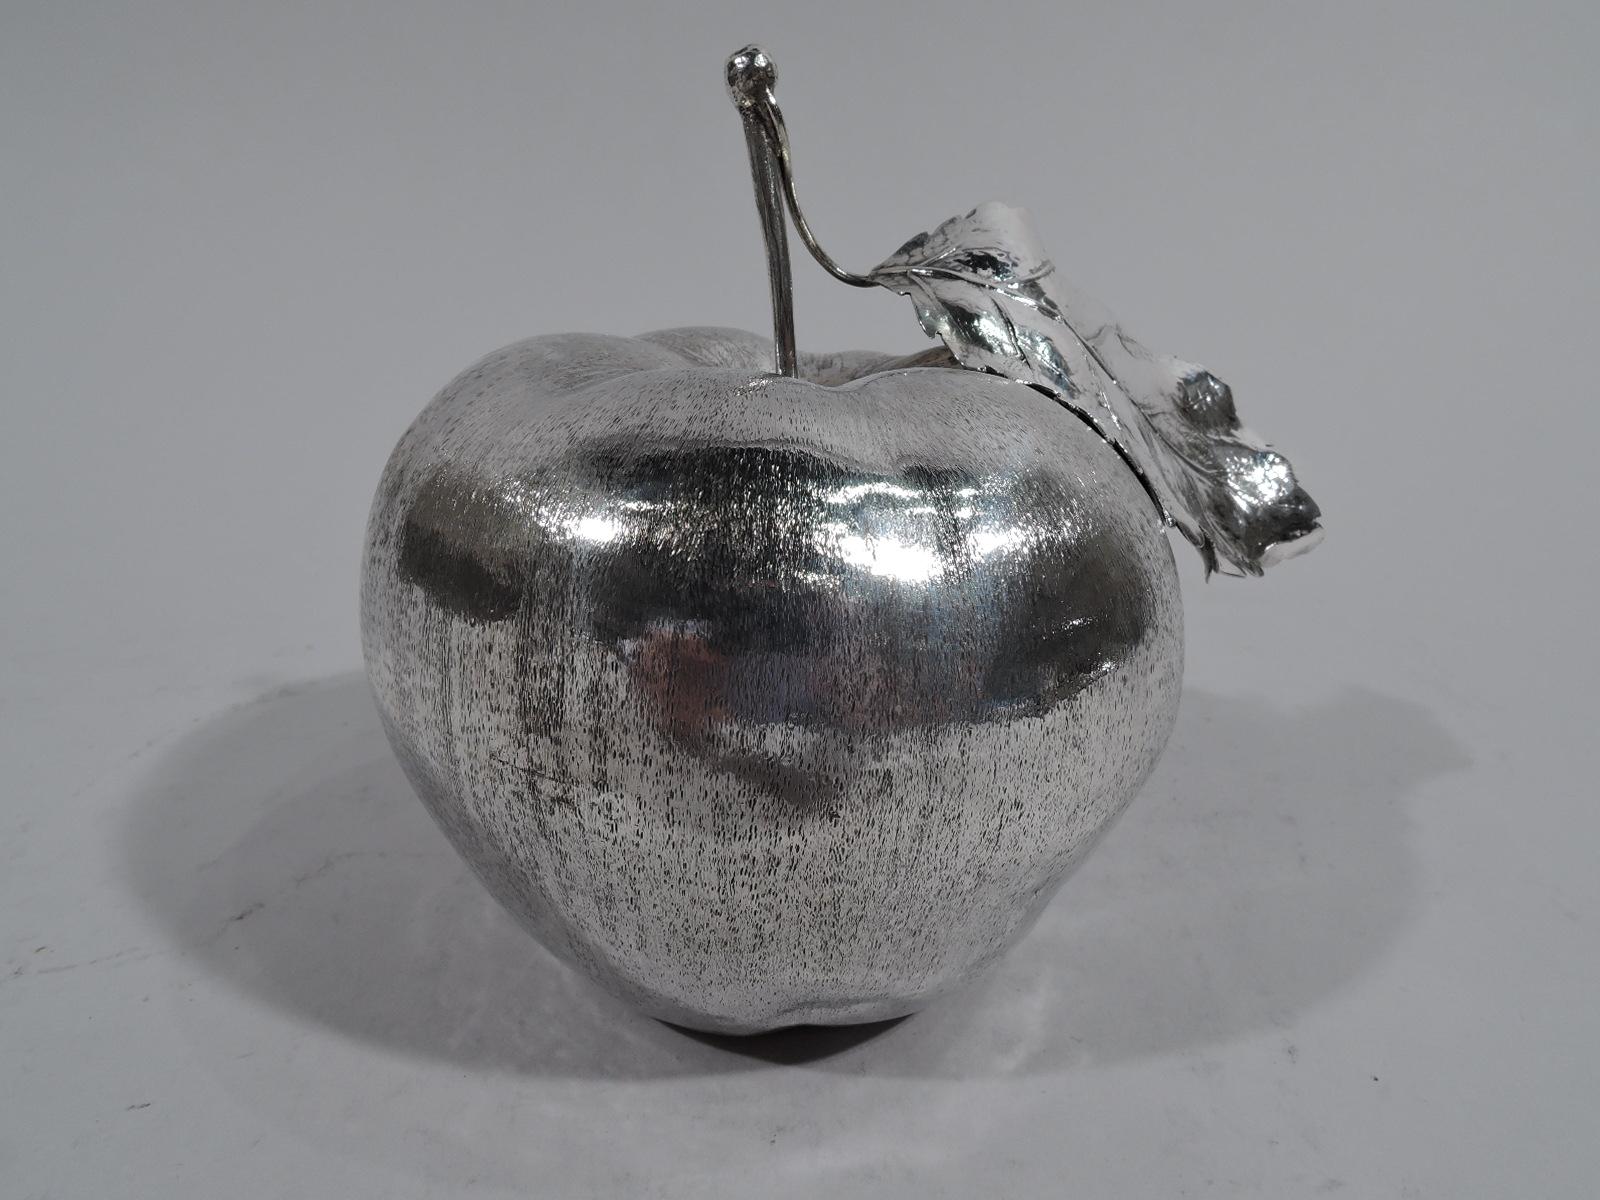 Stylish sterling silver lighter. Made by Mario Buccellati in Milan. Large apple with naturalistic irregular form and striated skin. Long stem with leaf. Detachable lighter set in underside. Marked “925 / Mario Buccellati”. Weight (without lighter):